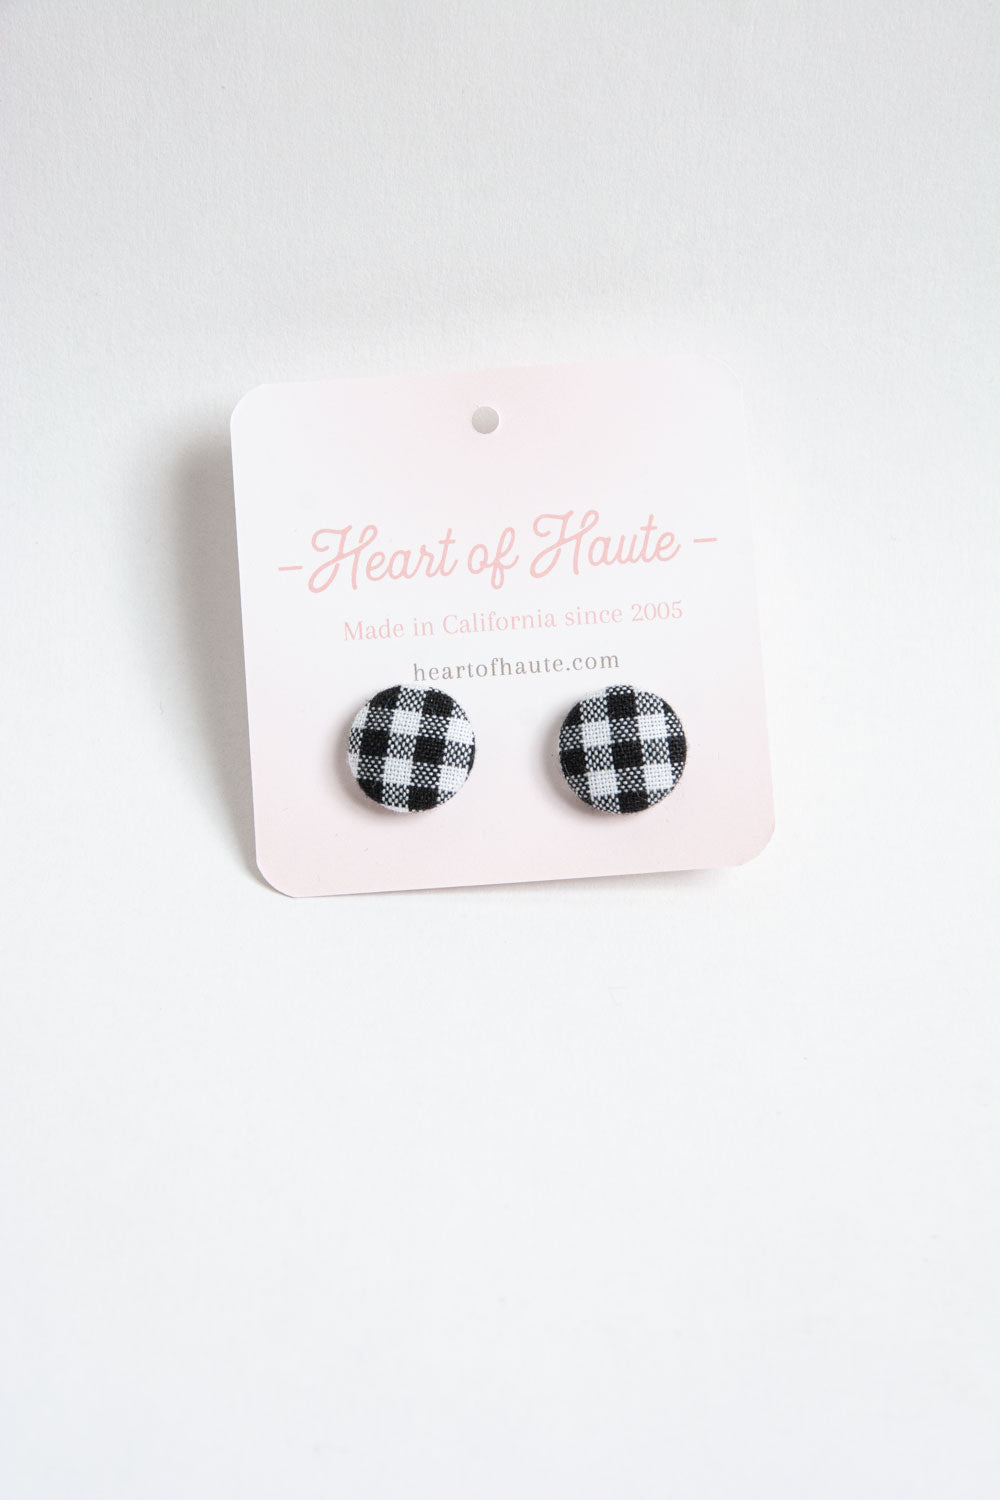 Button Earrings- Classic Gingham